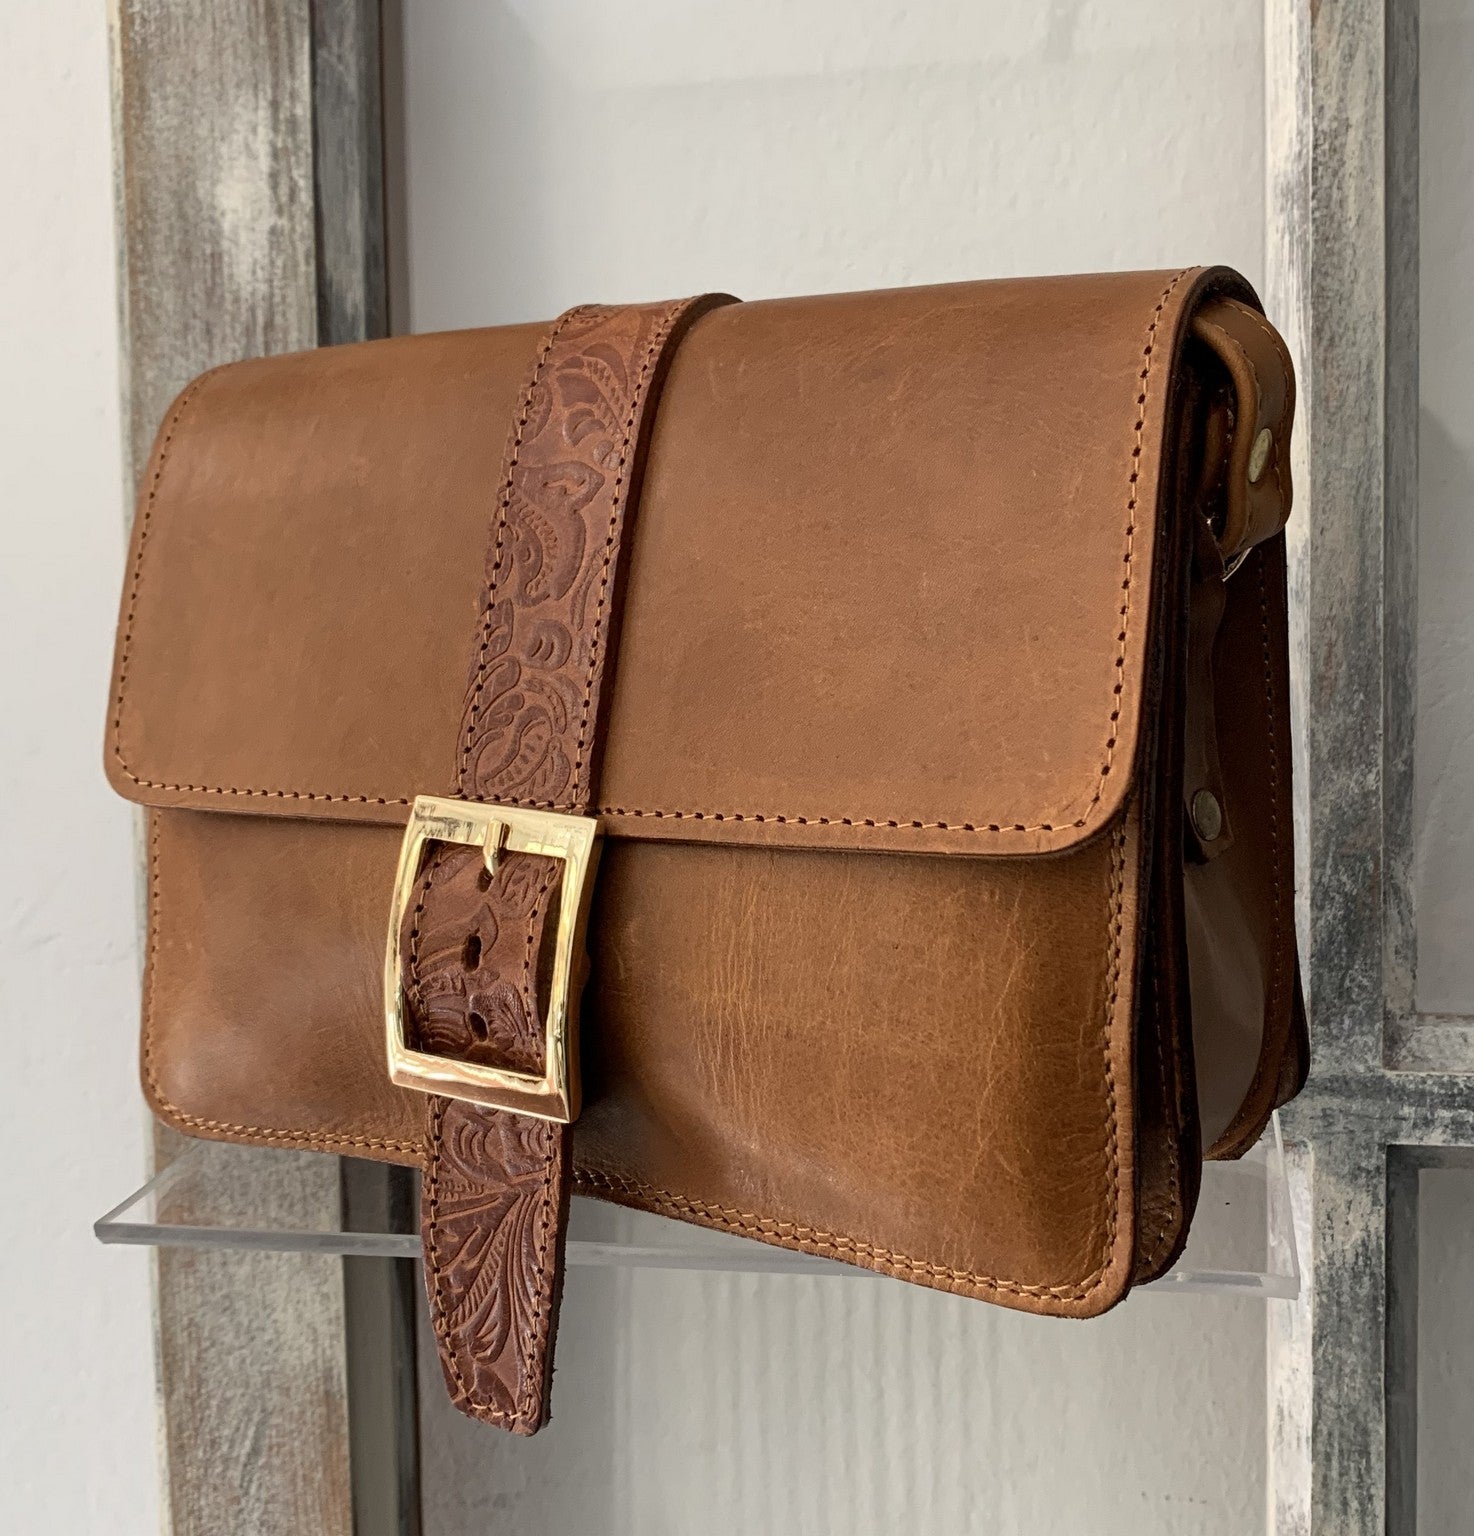 Kalypso" - small crossbody bag handcrafted from natural light brown leather with flower details  WT/325F2FΤ